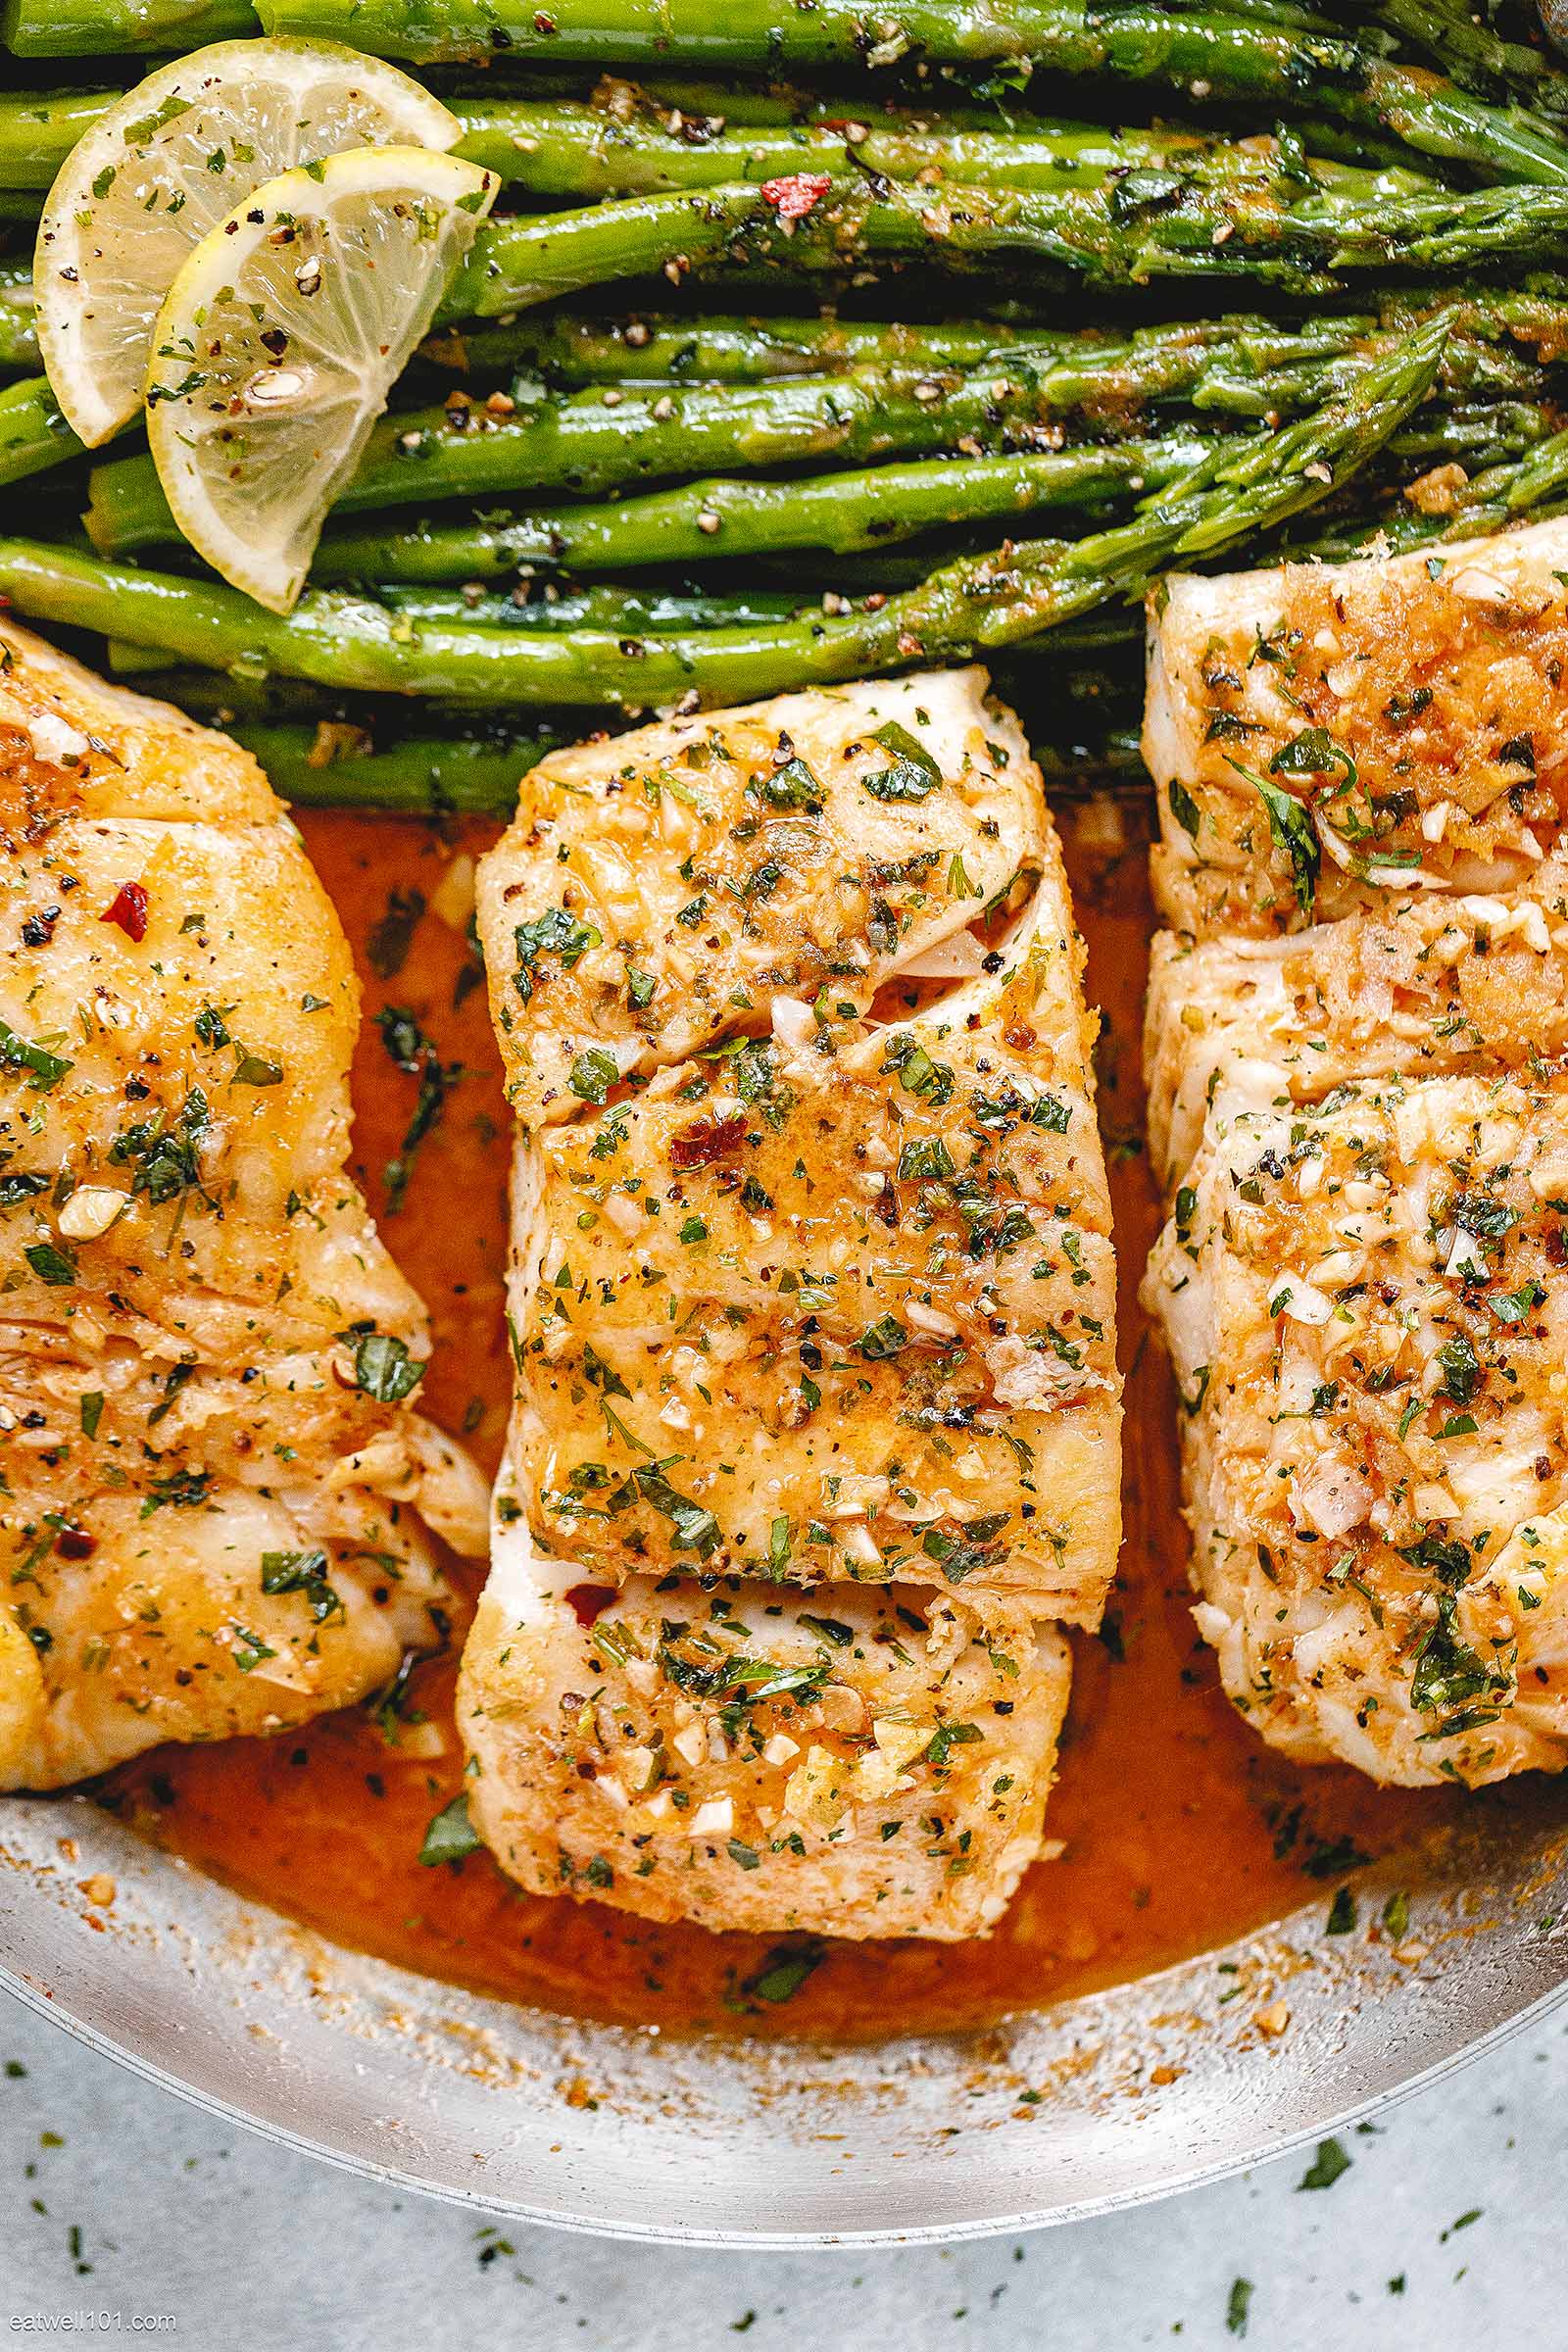 Garlic Butter Cod With Lemon Asparagus Skillet Healthy Fish Recipe Eatwell101